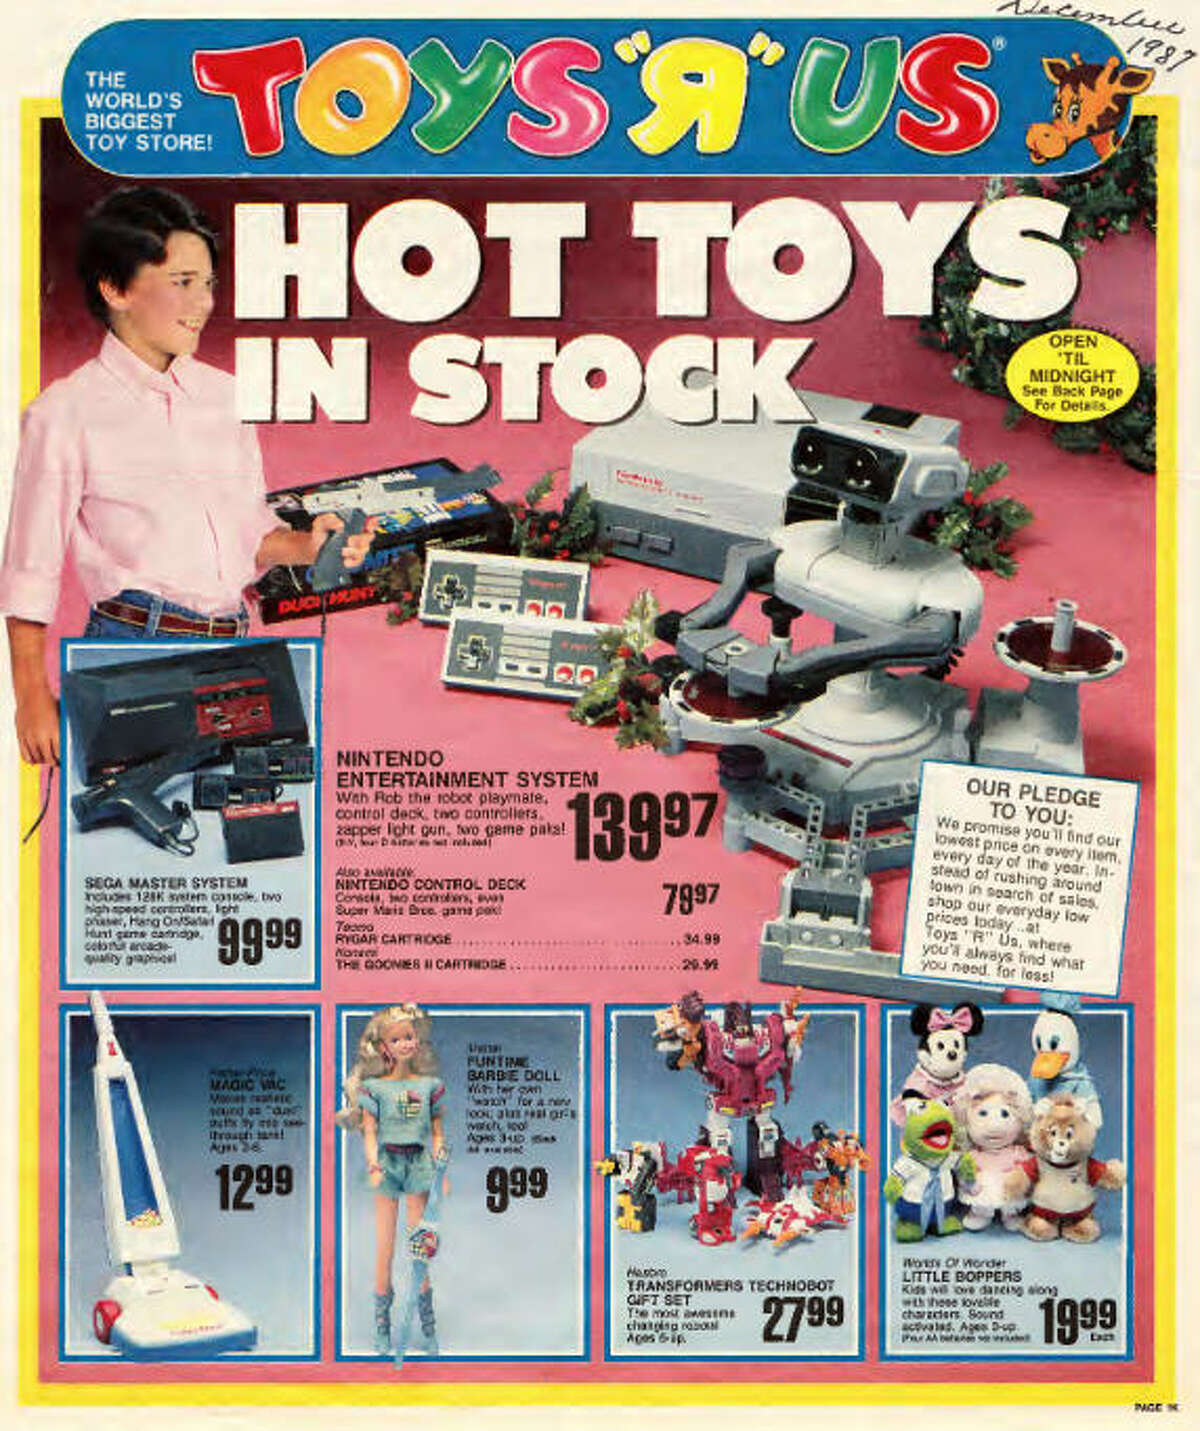 Toys 'R' Us catalog shows the hottest toys of 1987